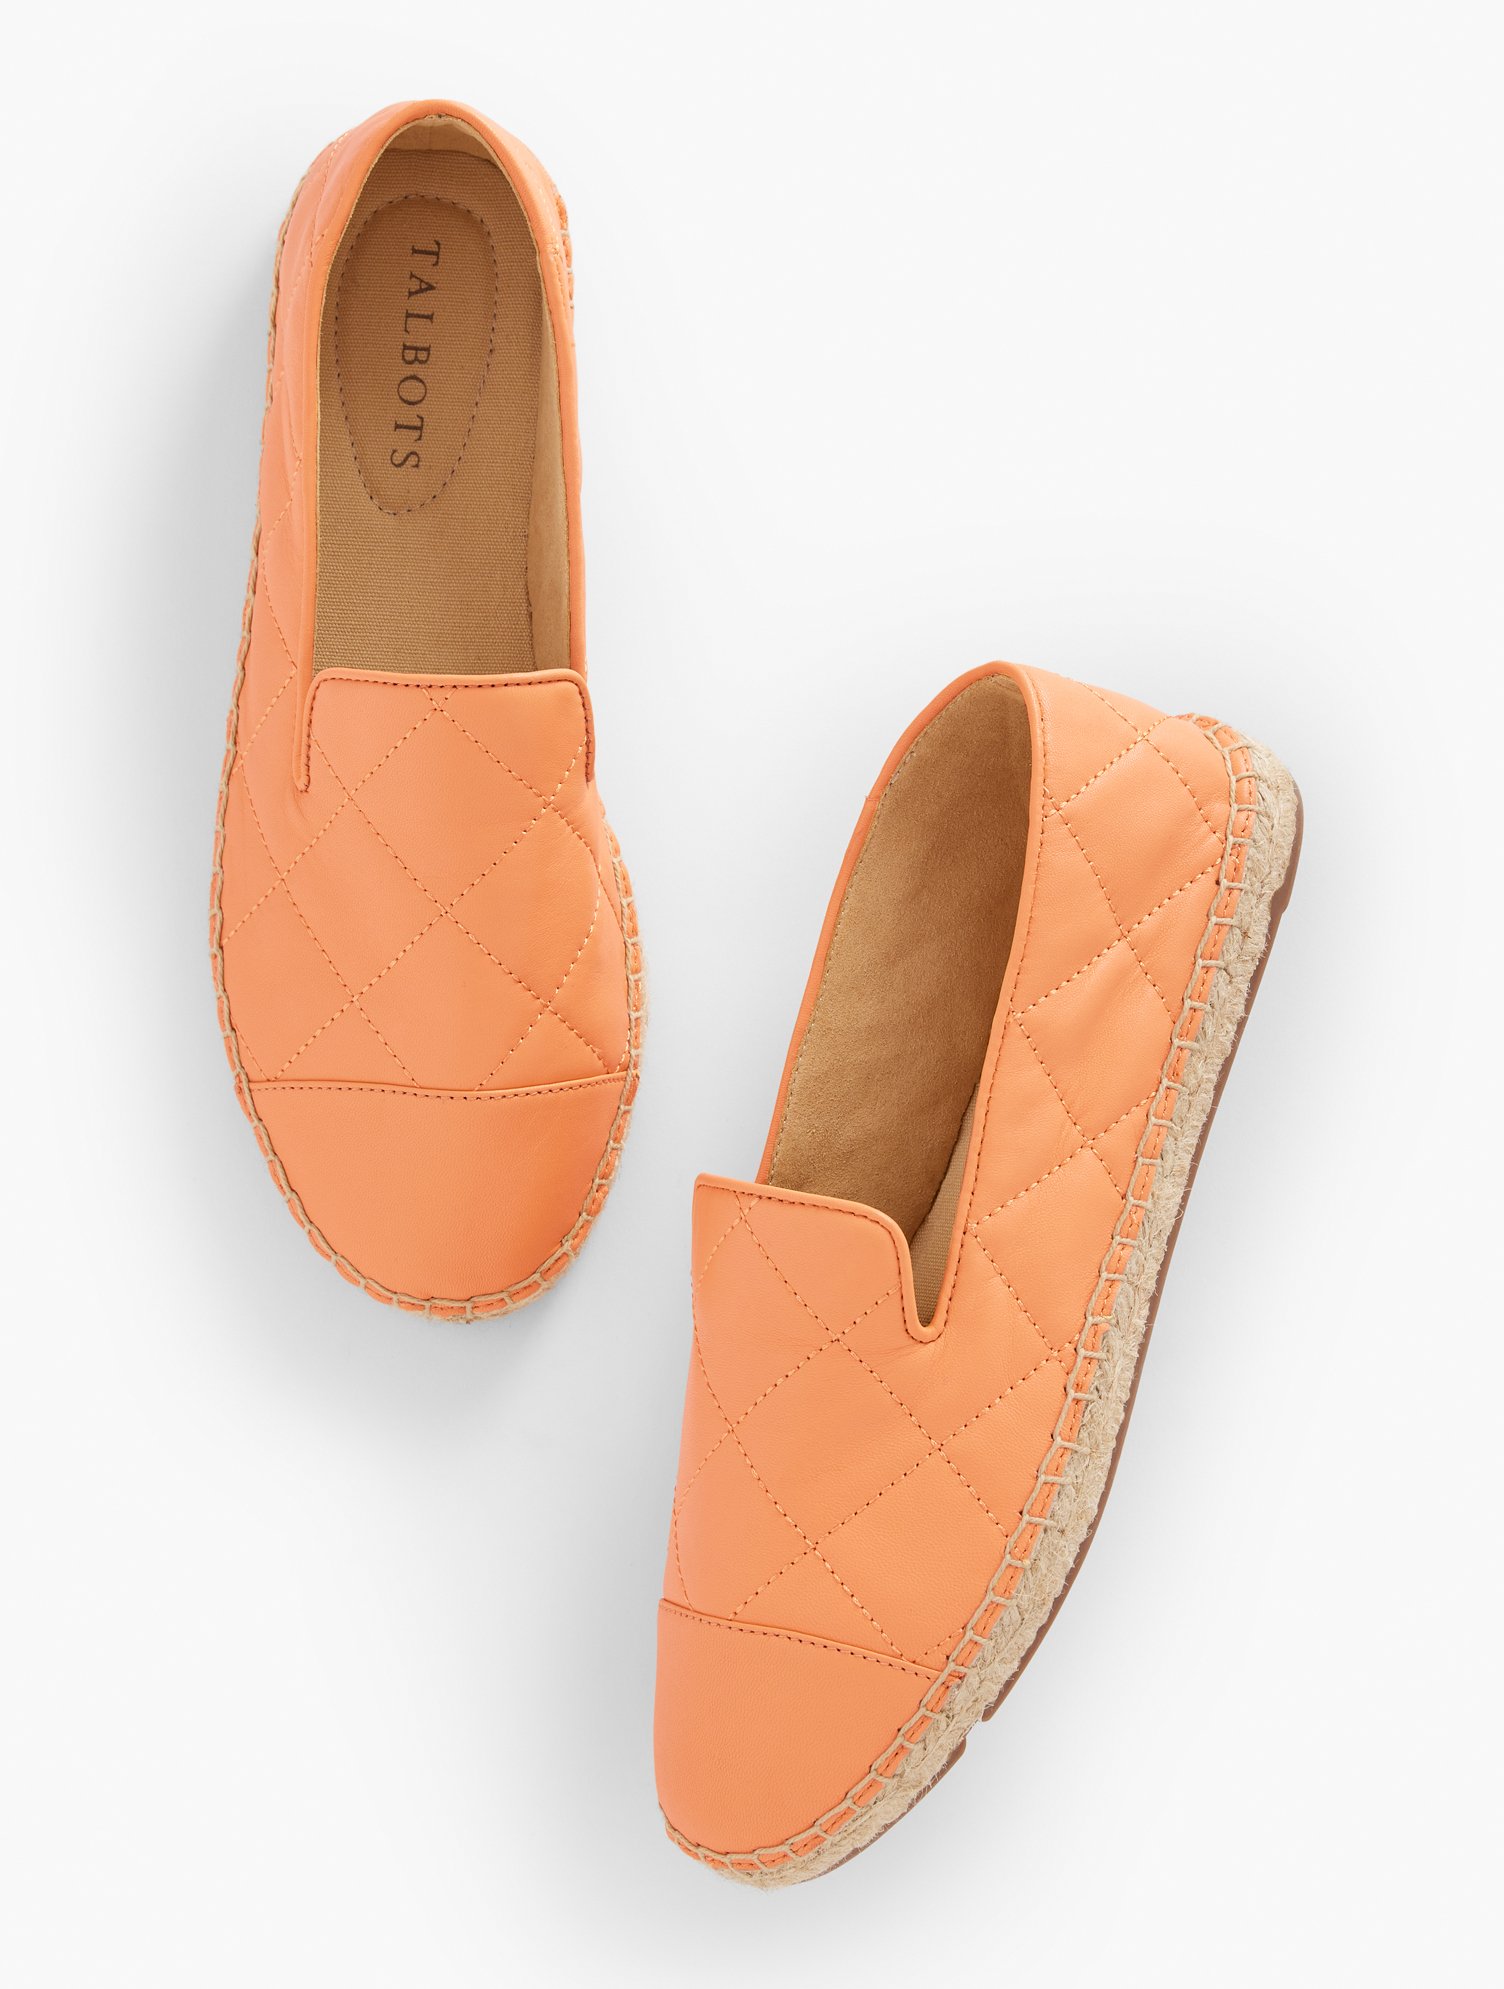 Talbots Izzy Nappa Leather Espadrille Flats - Quilted - Peach Sorbet - 9m